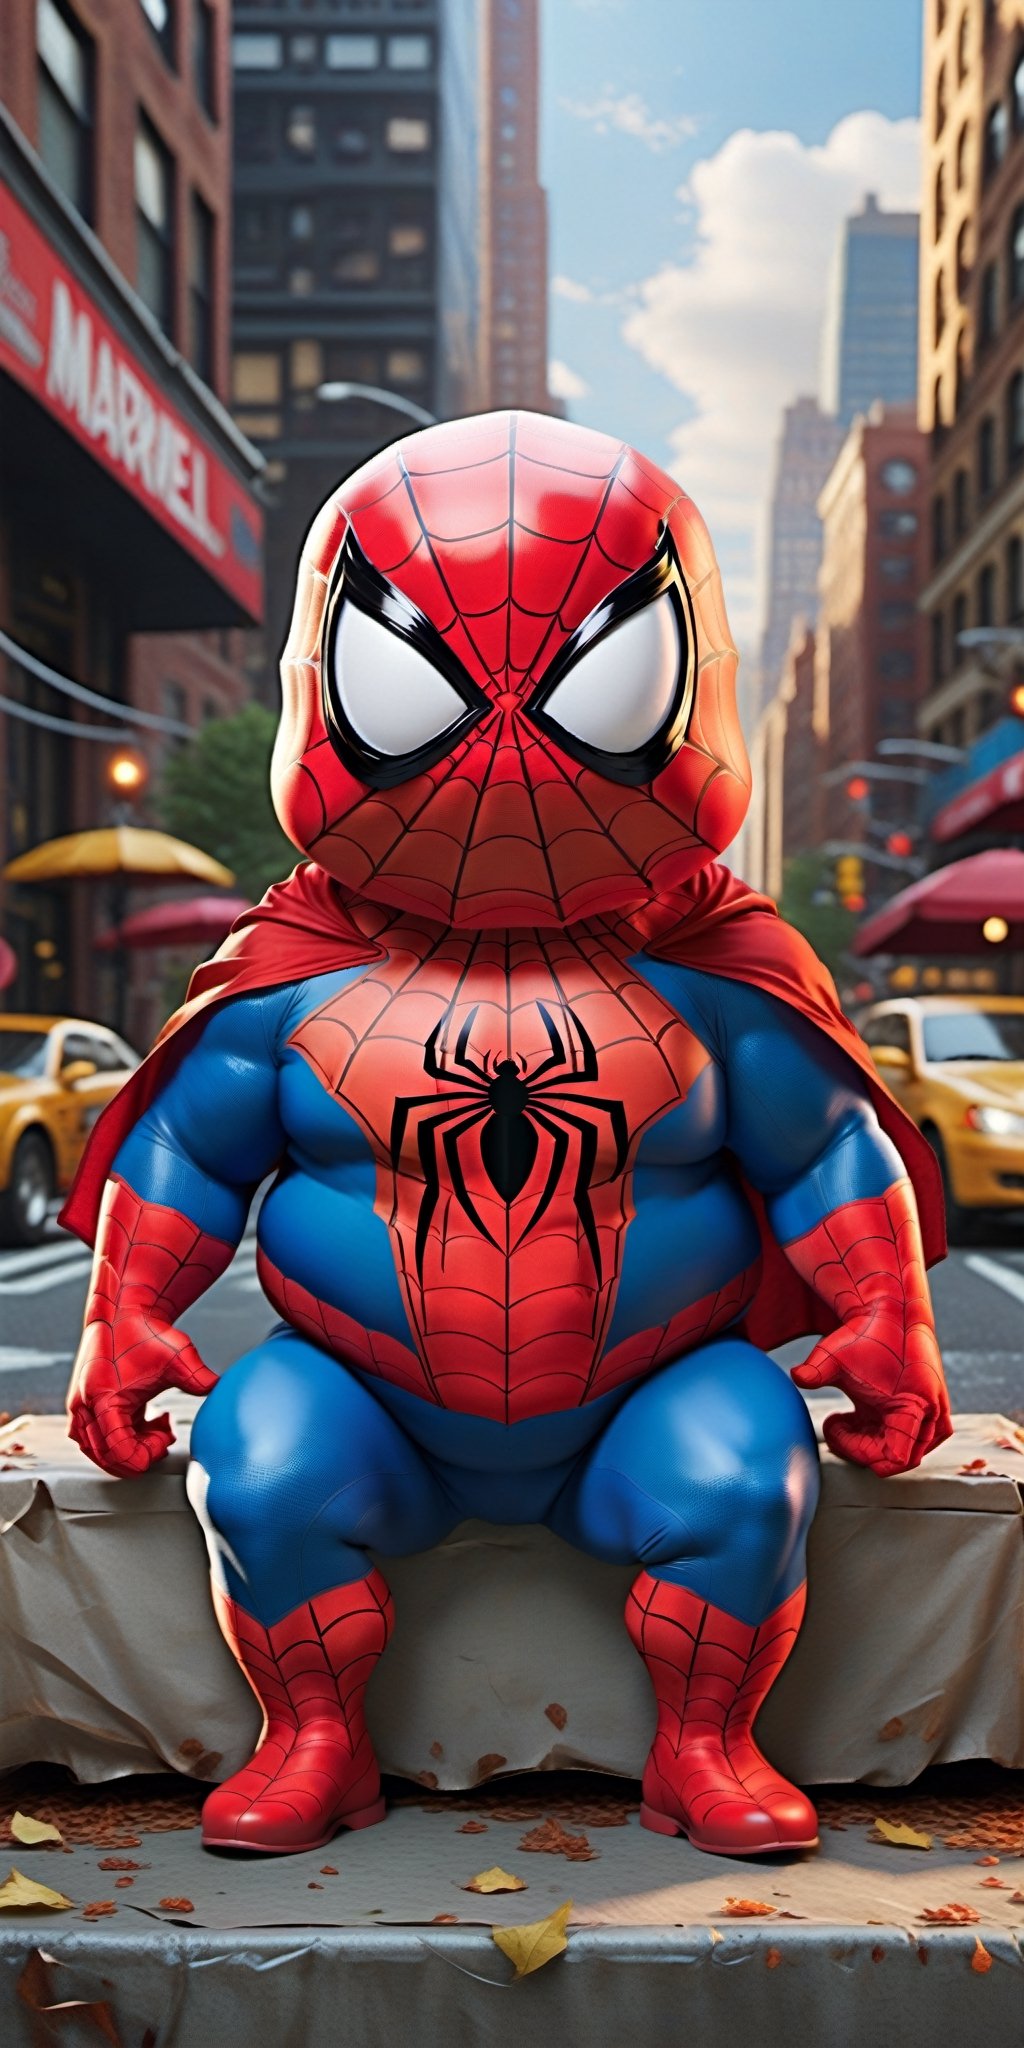 Craft an elaborate and hilarious image of Spider-Man, unexpectedly transformed into an extremely chubby and comical superhero. Enrich the scene with a funny background, perhaps showcasing befuddled onlookers or other Marvel characters reacting with surprise. Ensure Spider-Man retains the iconic costume, and let the entire composition radiate with humor in this uniquely amusing superhero moment.